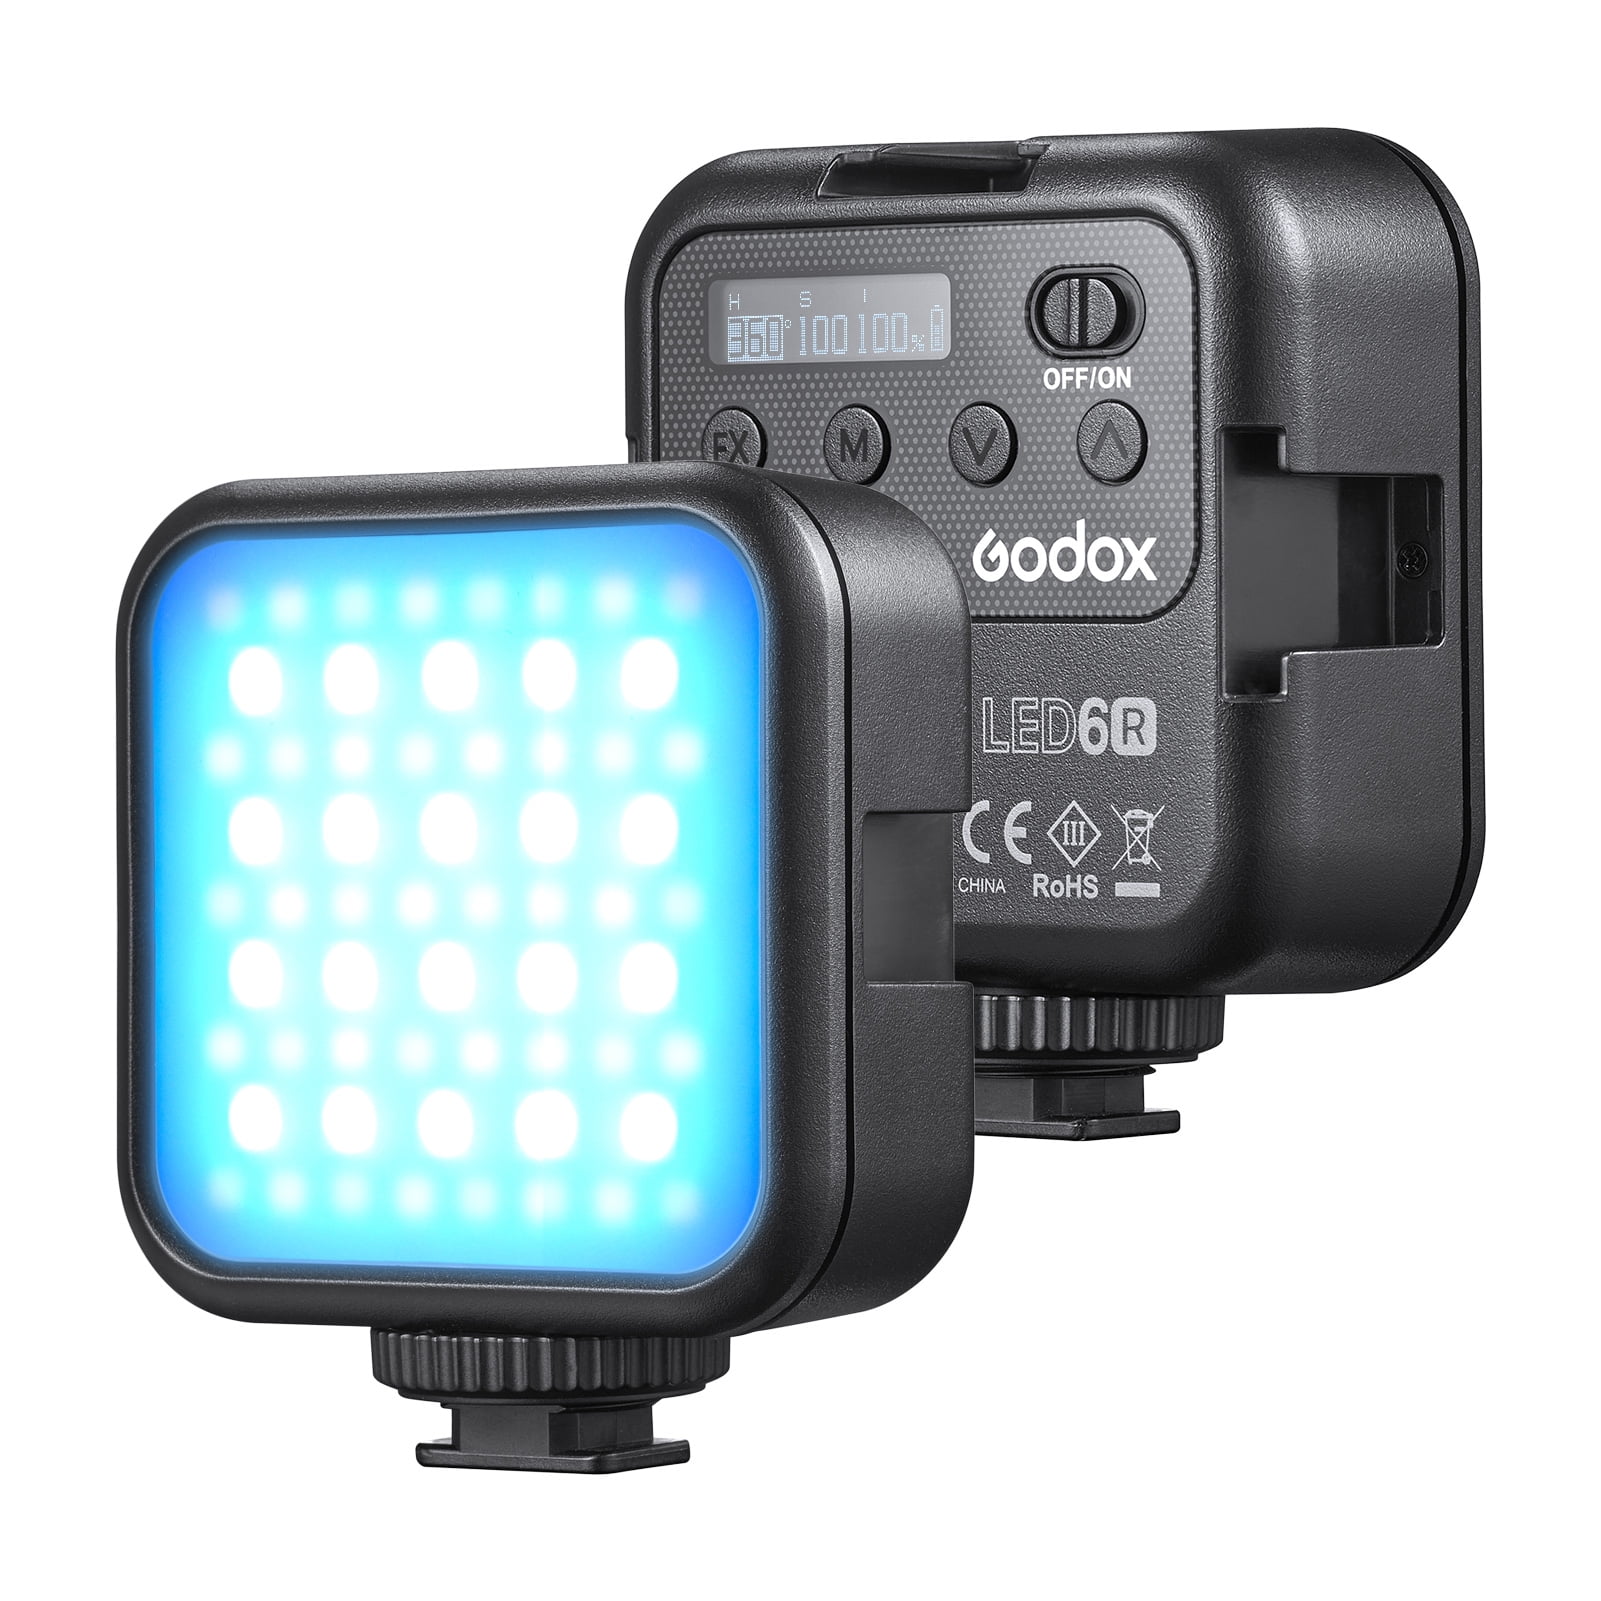 Perfect for YouTube Studio On-Camera Light 3200-6500K 100 Bubls & CRI up to 95+ with 4 Cold Shoe Video Shooting VIJIM LED Video Light for Camera Compatible with Phones and Cameras Vlogging,etc 